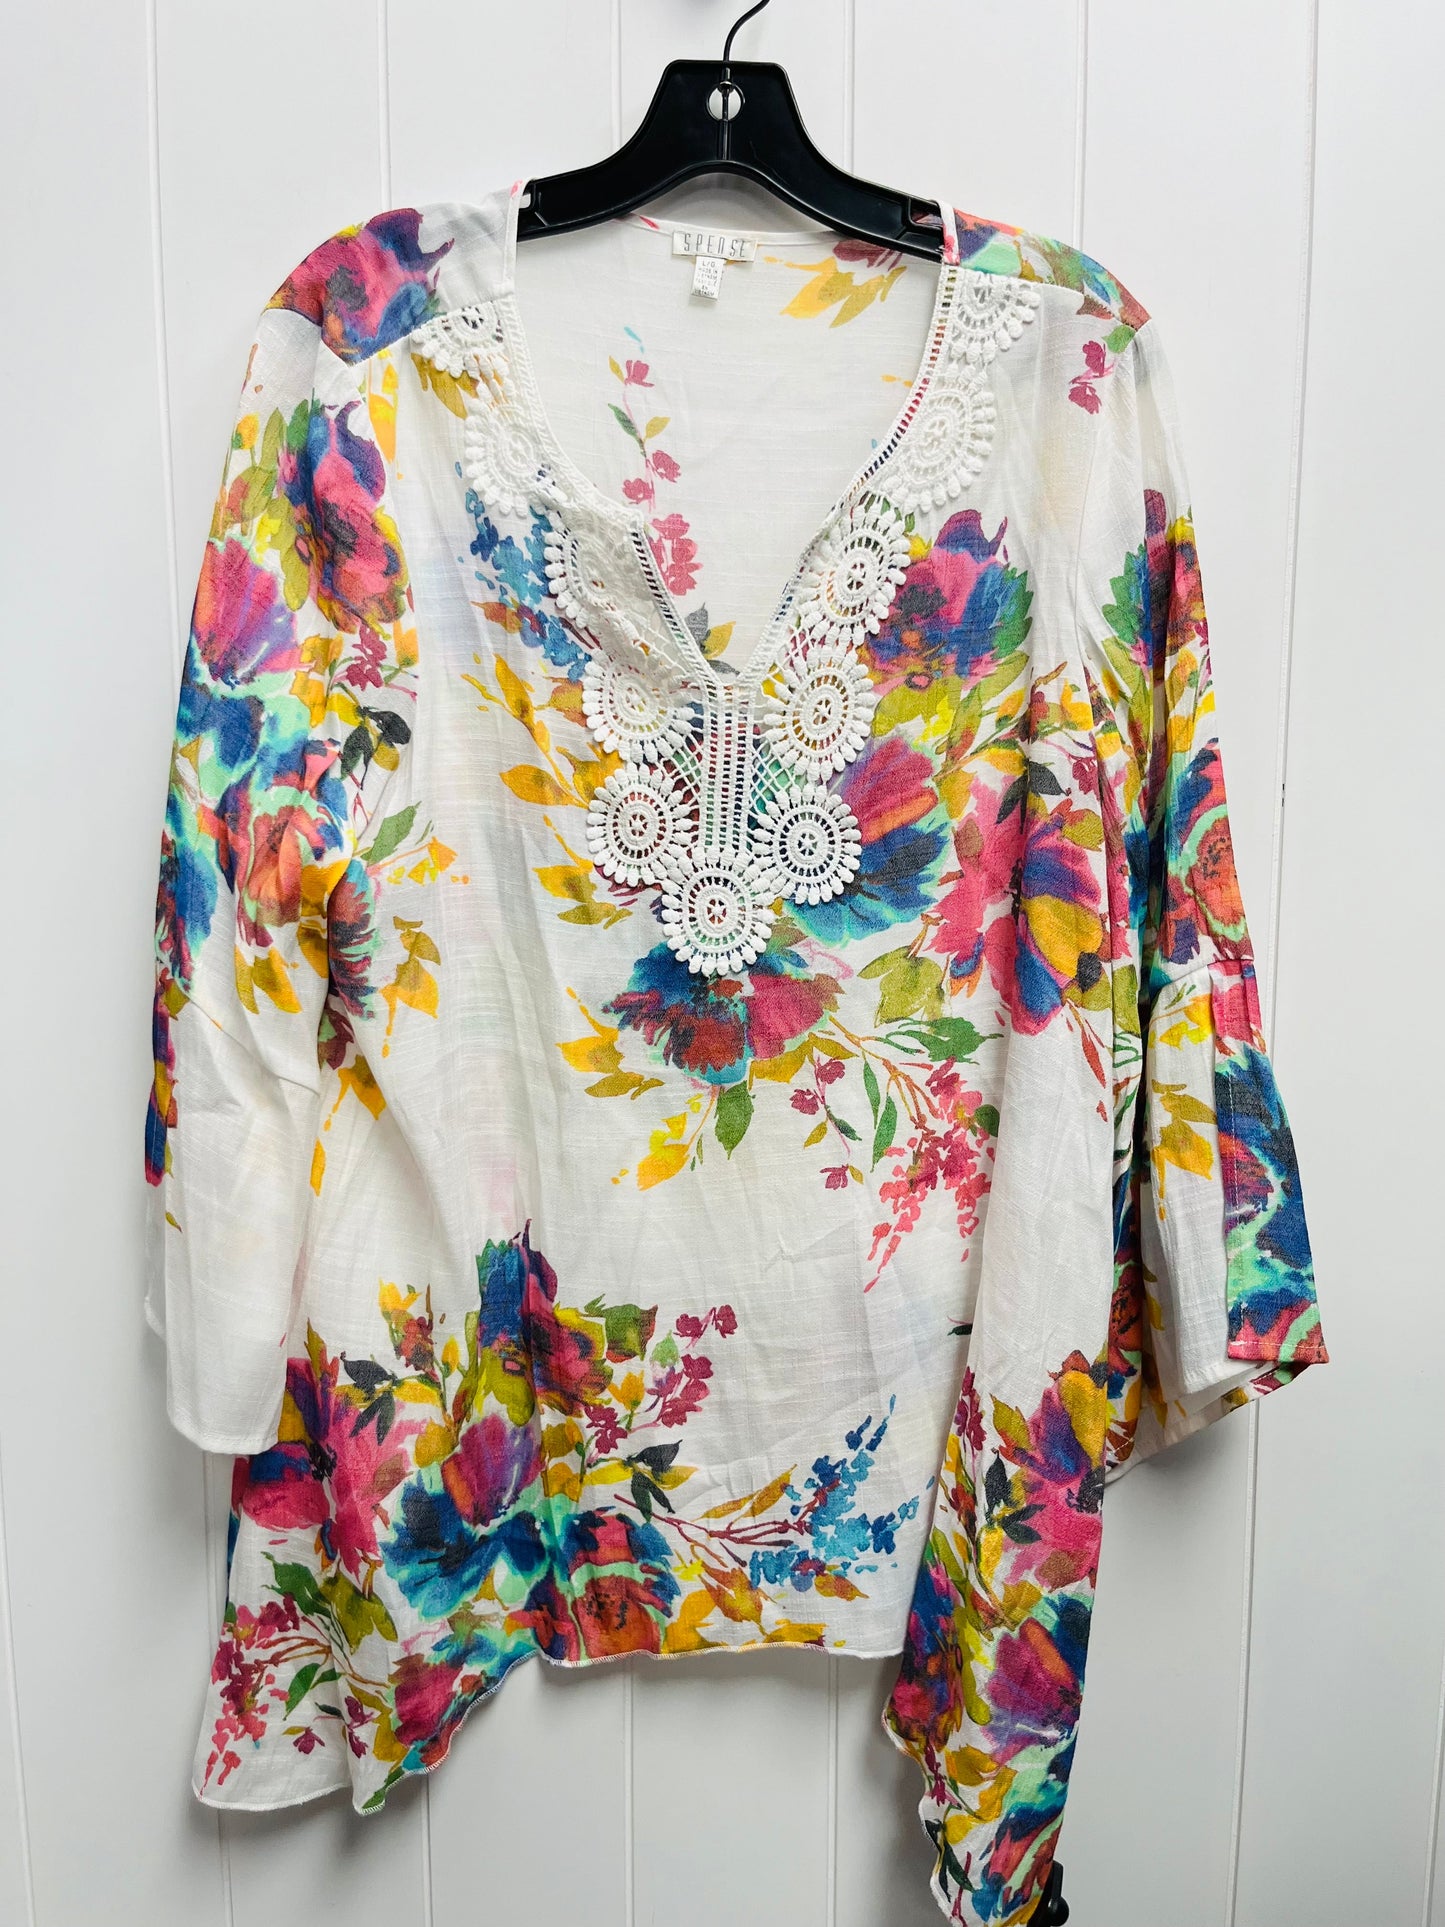 Pink & Yellow Top Long Sleeve Spense, Size L